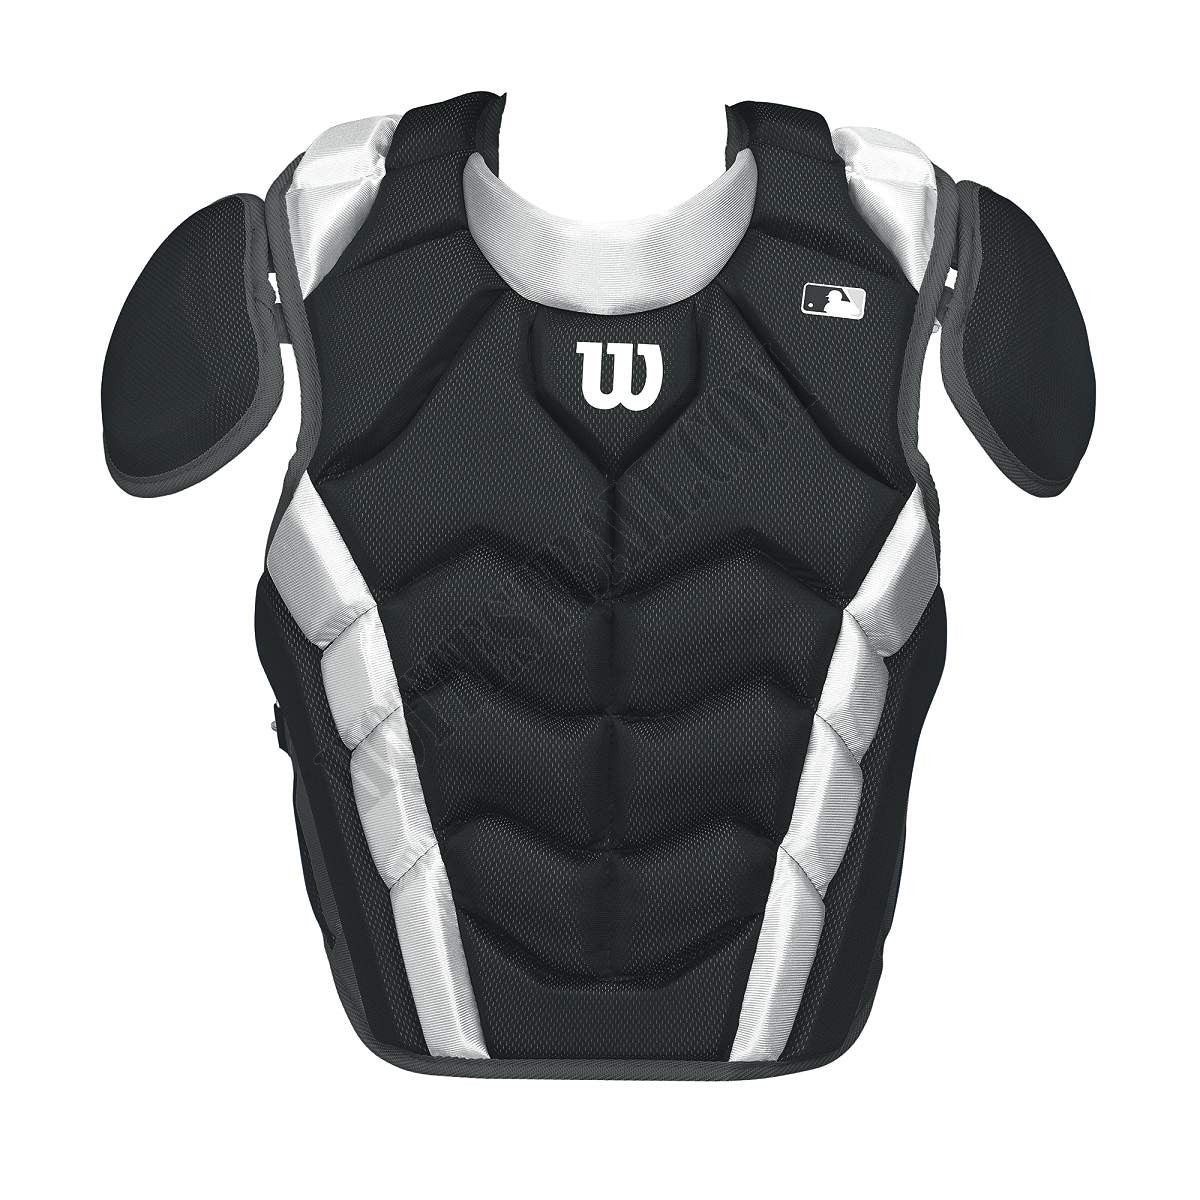 Pro Stock Chest Protector - Wilson Discount Store - -0